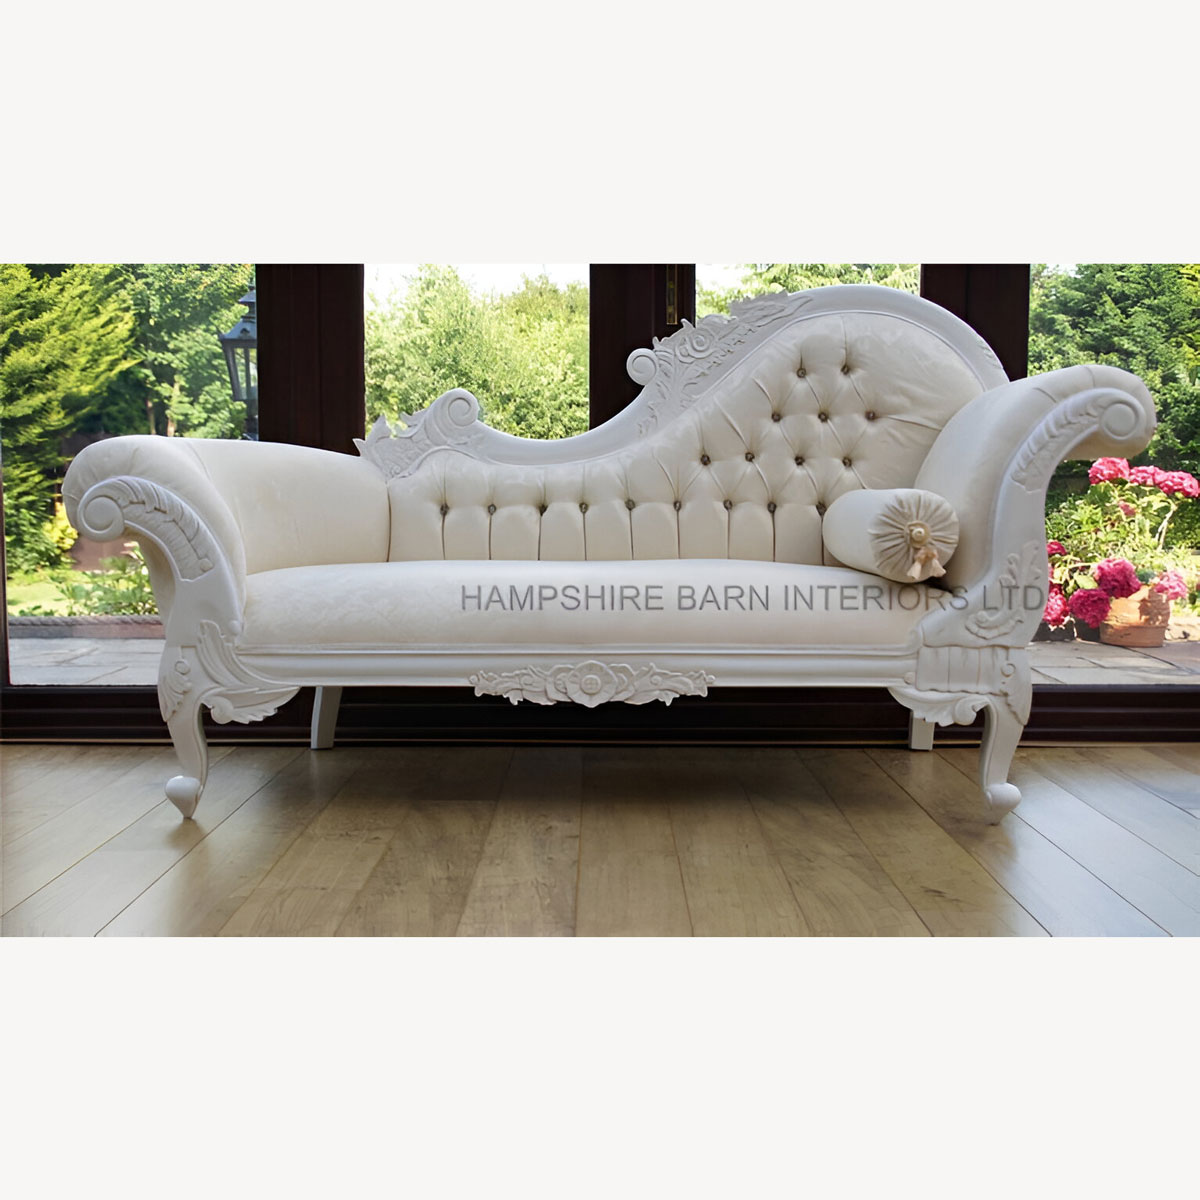 Antique White Wedding Stage Set 3 Piece Chaise Plus Two Matching Chairs With Crystals 2 - Hampshire Barn Interiors - Antique White Wedding Stage Set 3 Piece Chaise Plus Two Matching Chairs With Crystals -